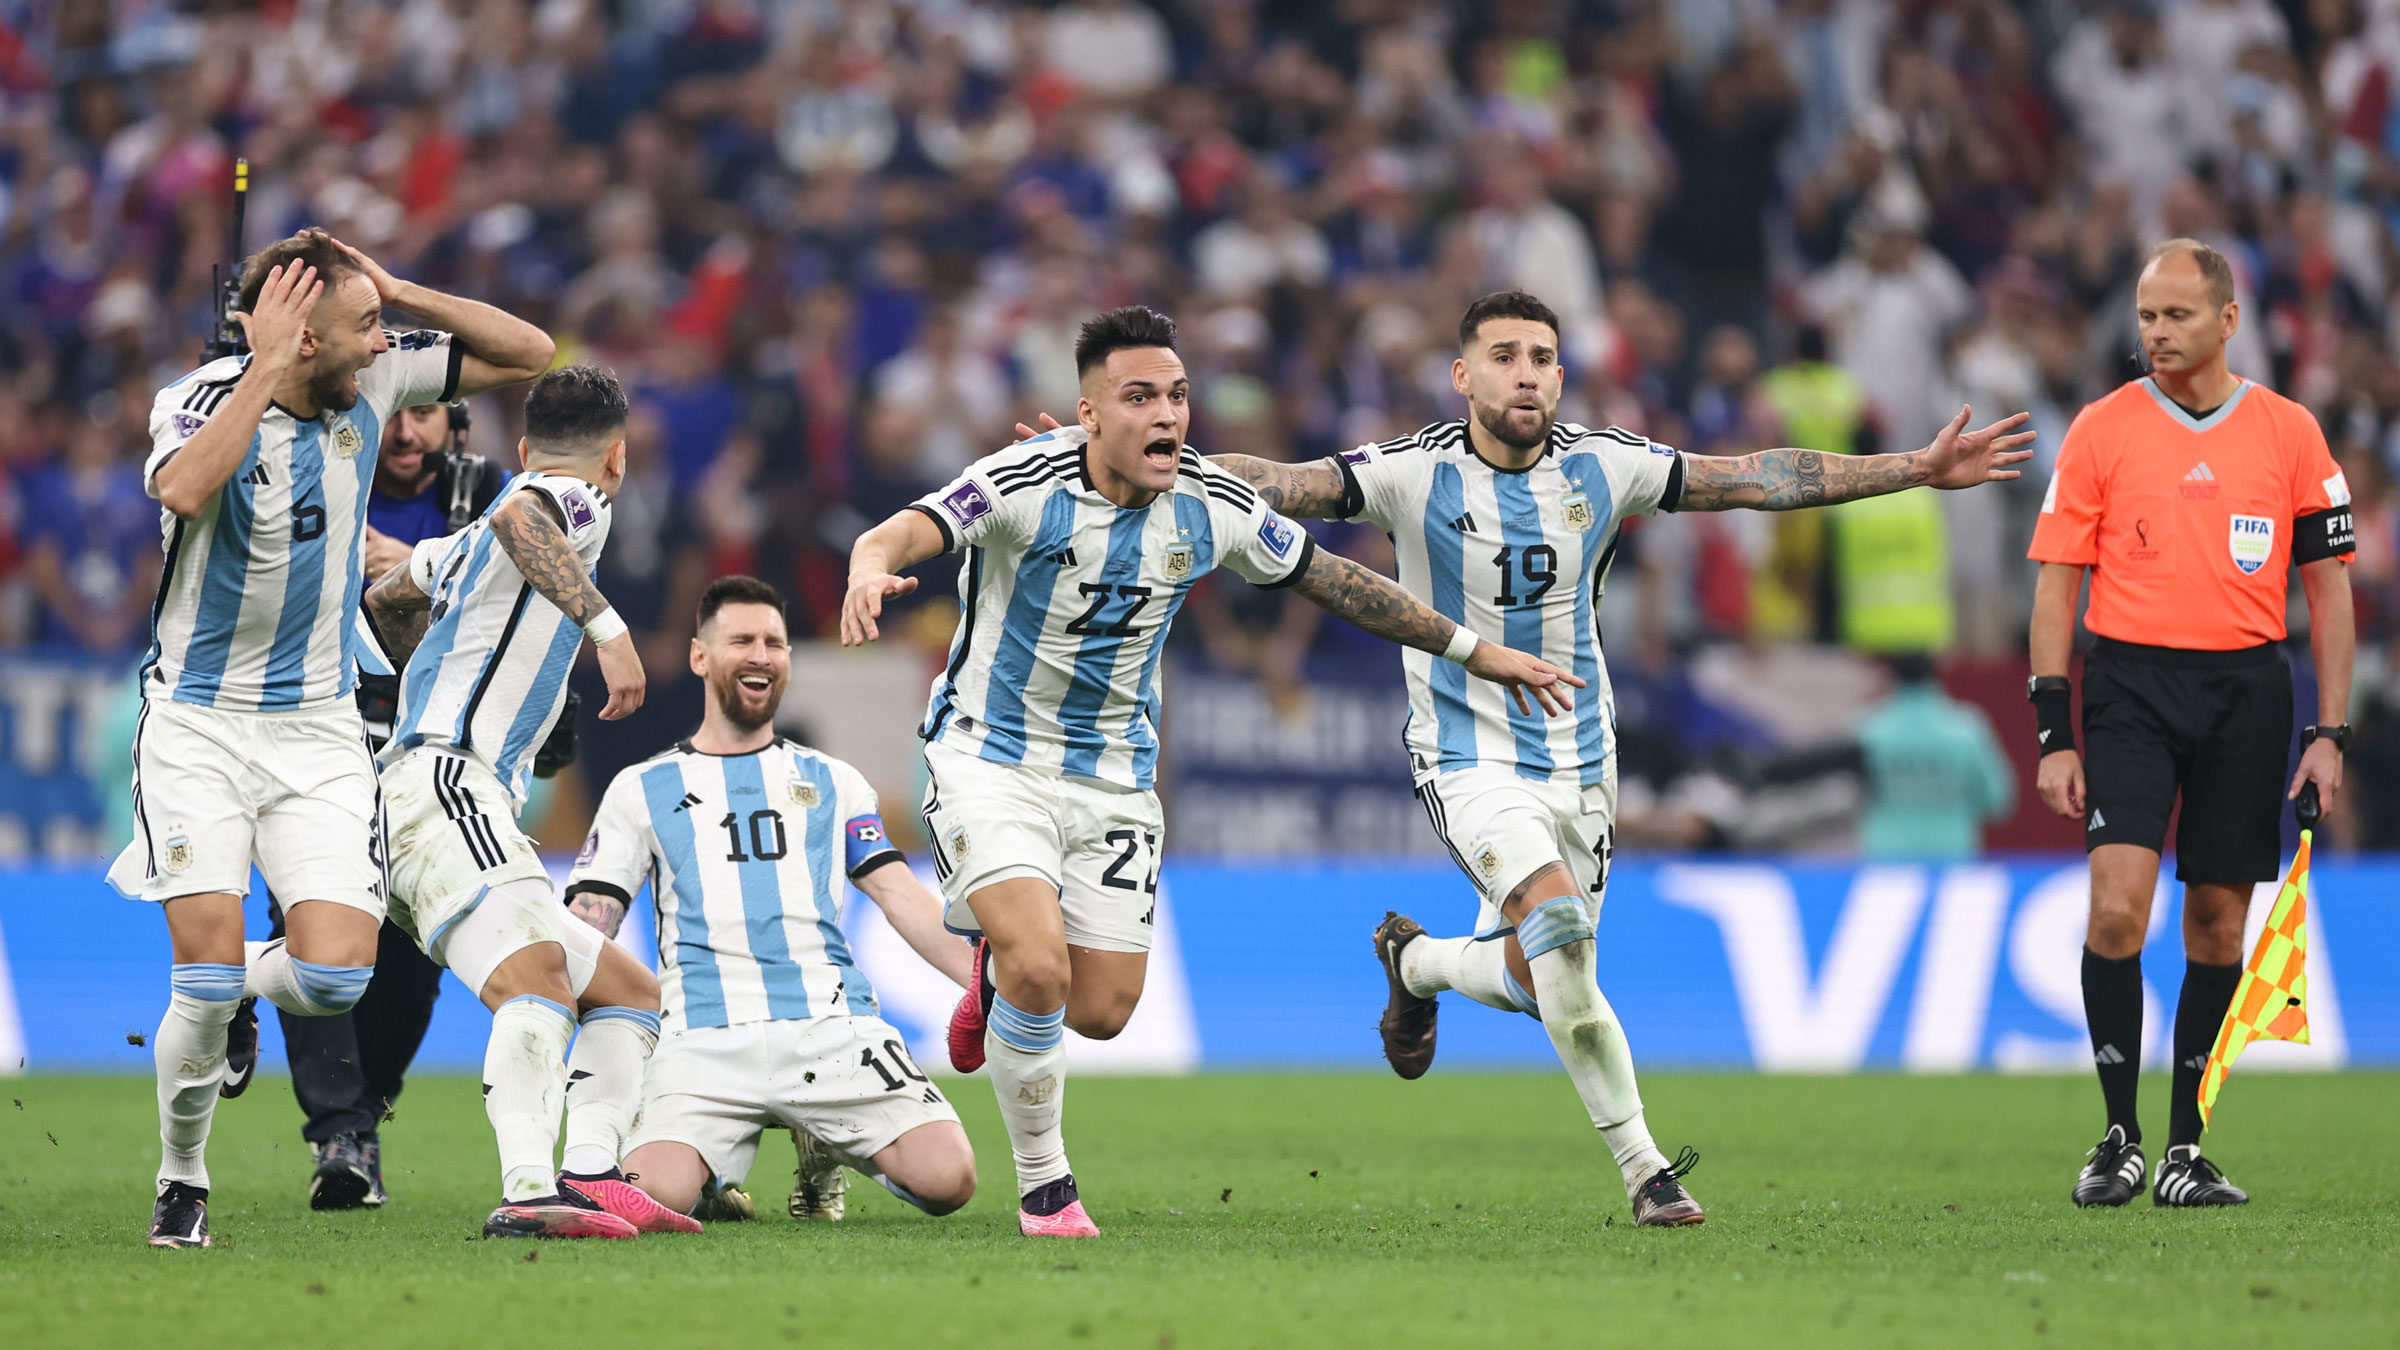 Argentina players celebrate after winning the World Cup.